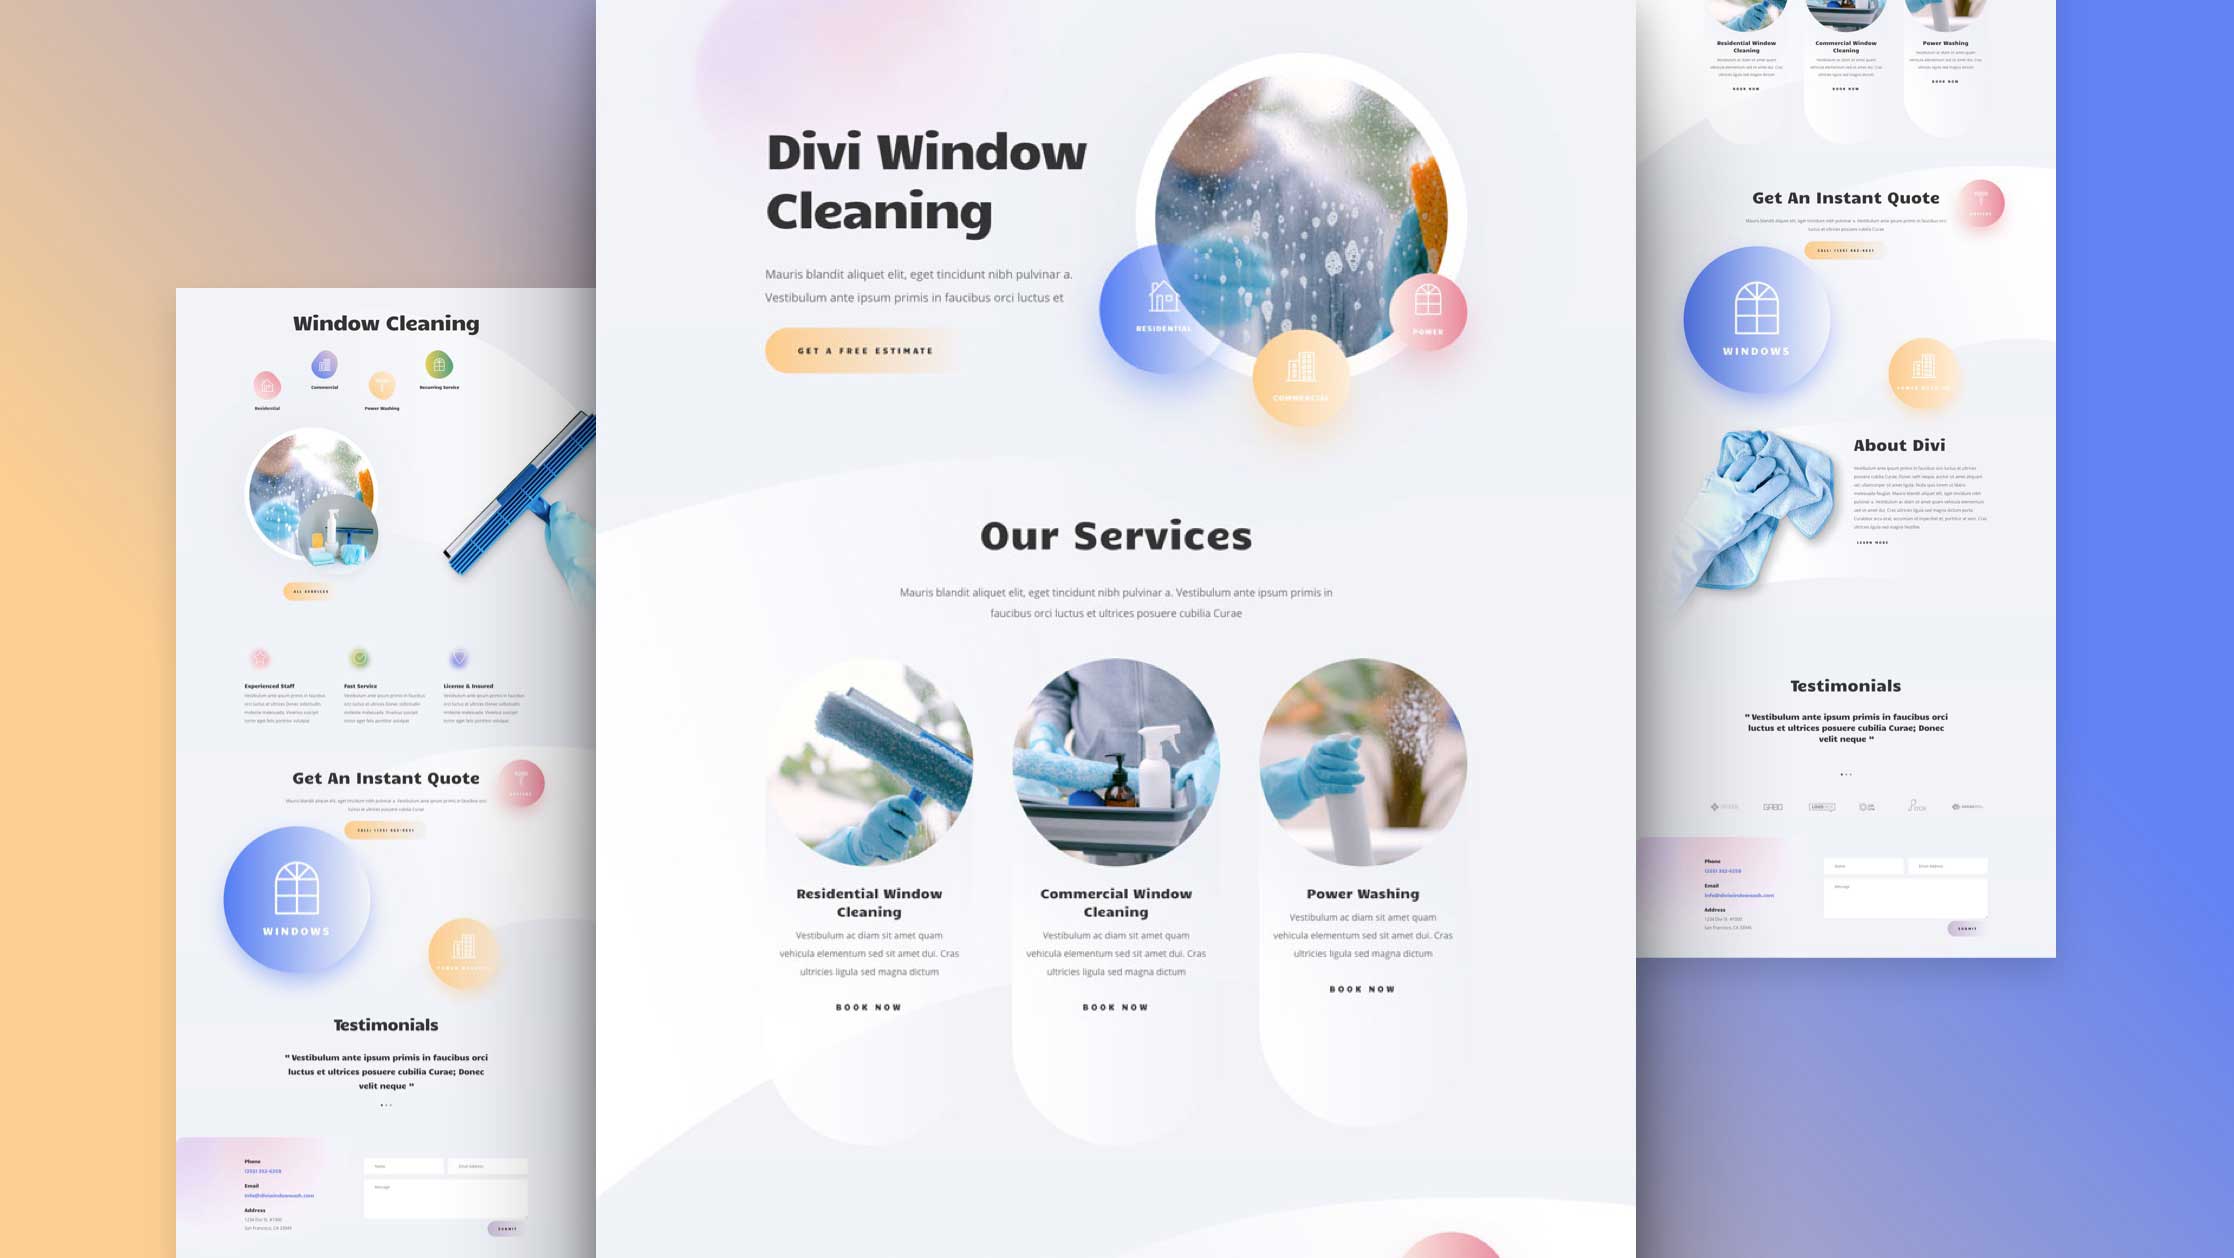 Get a FREE Window Cleaning Layout Pack for Divi